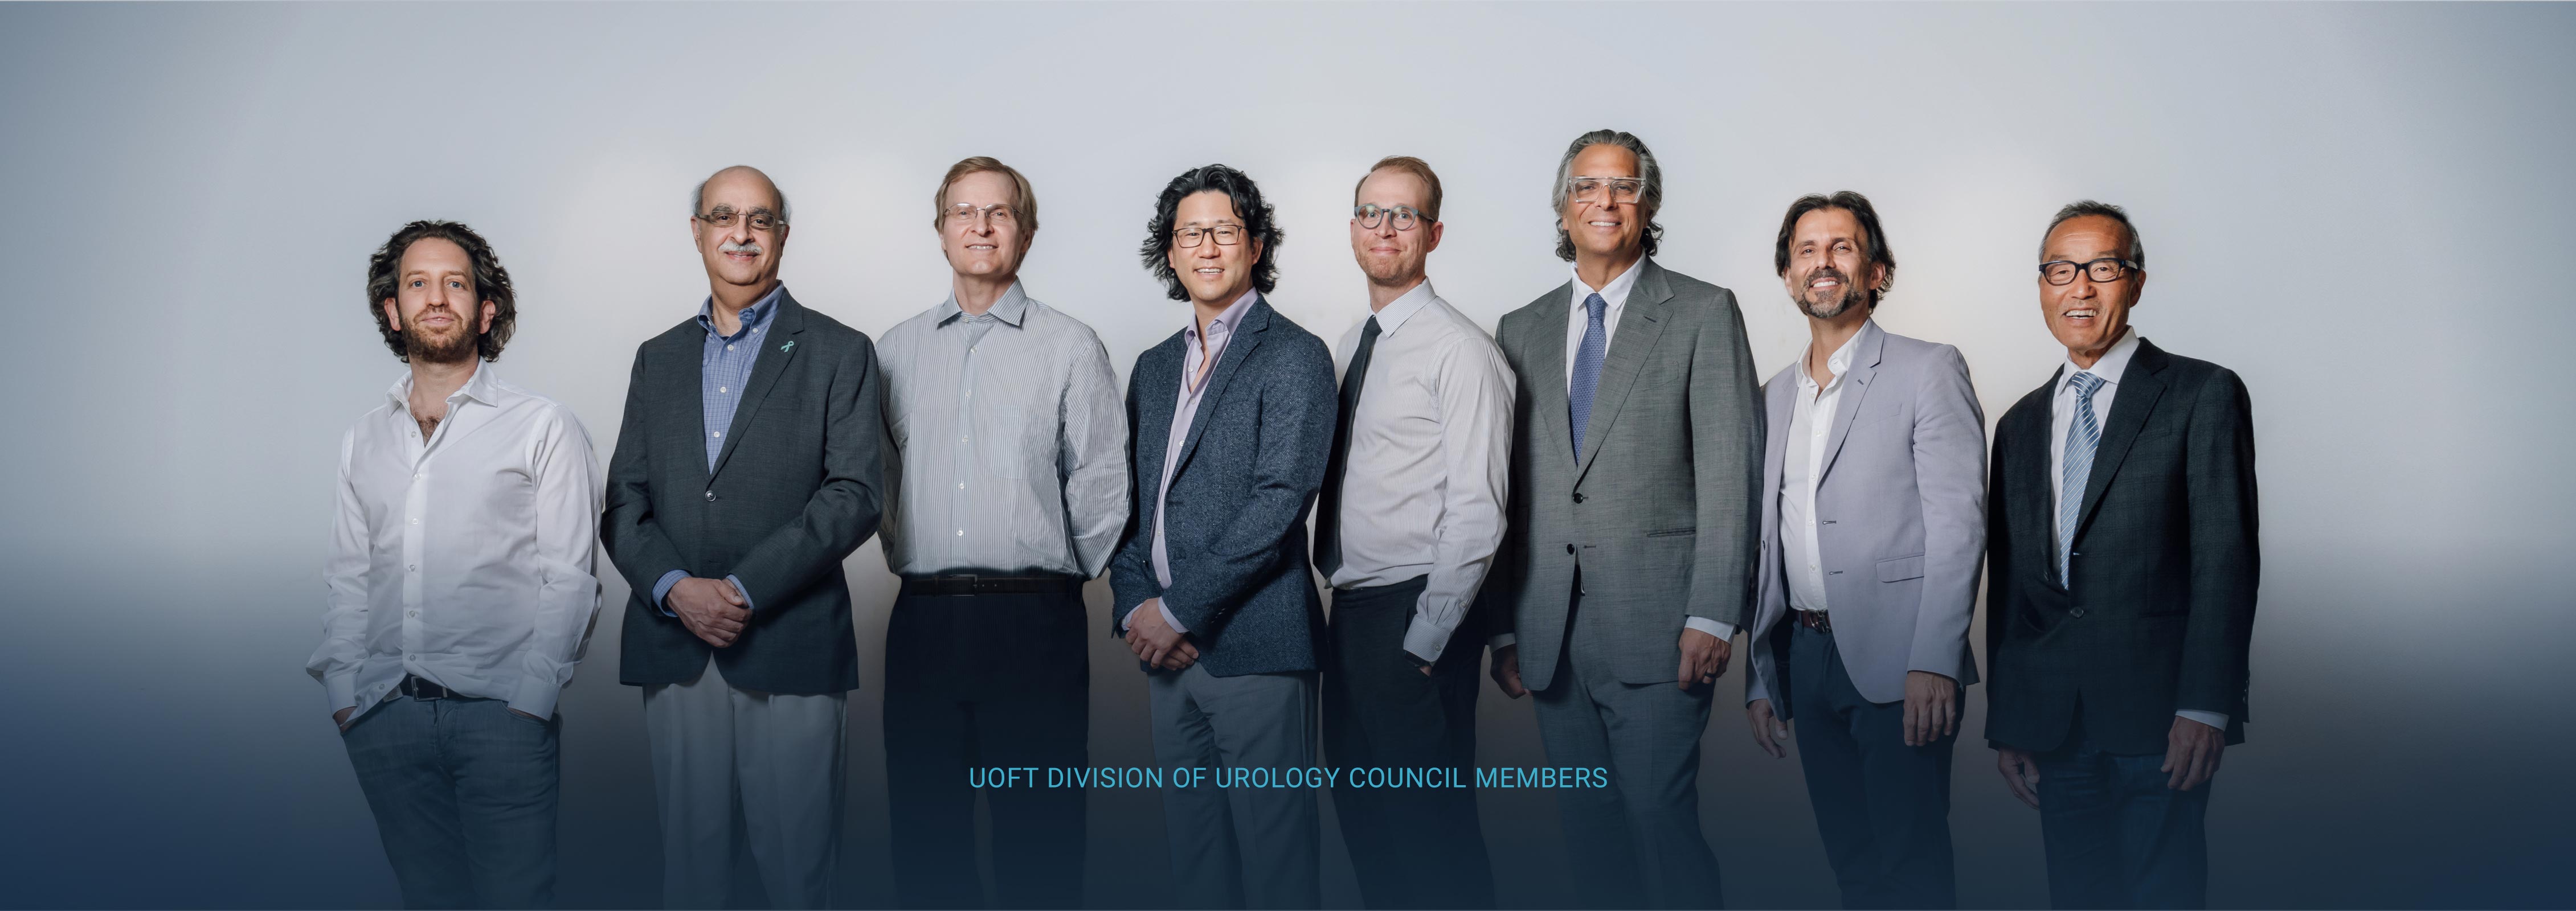 UofT Division of Urology Council Members